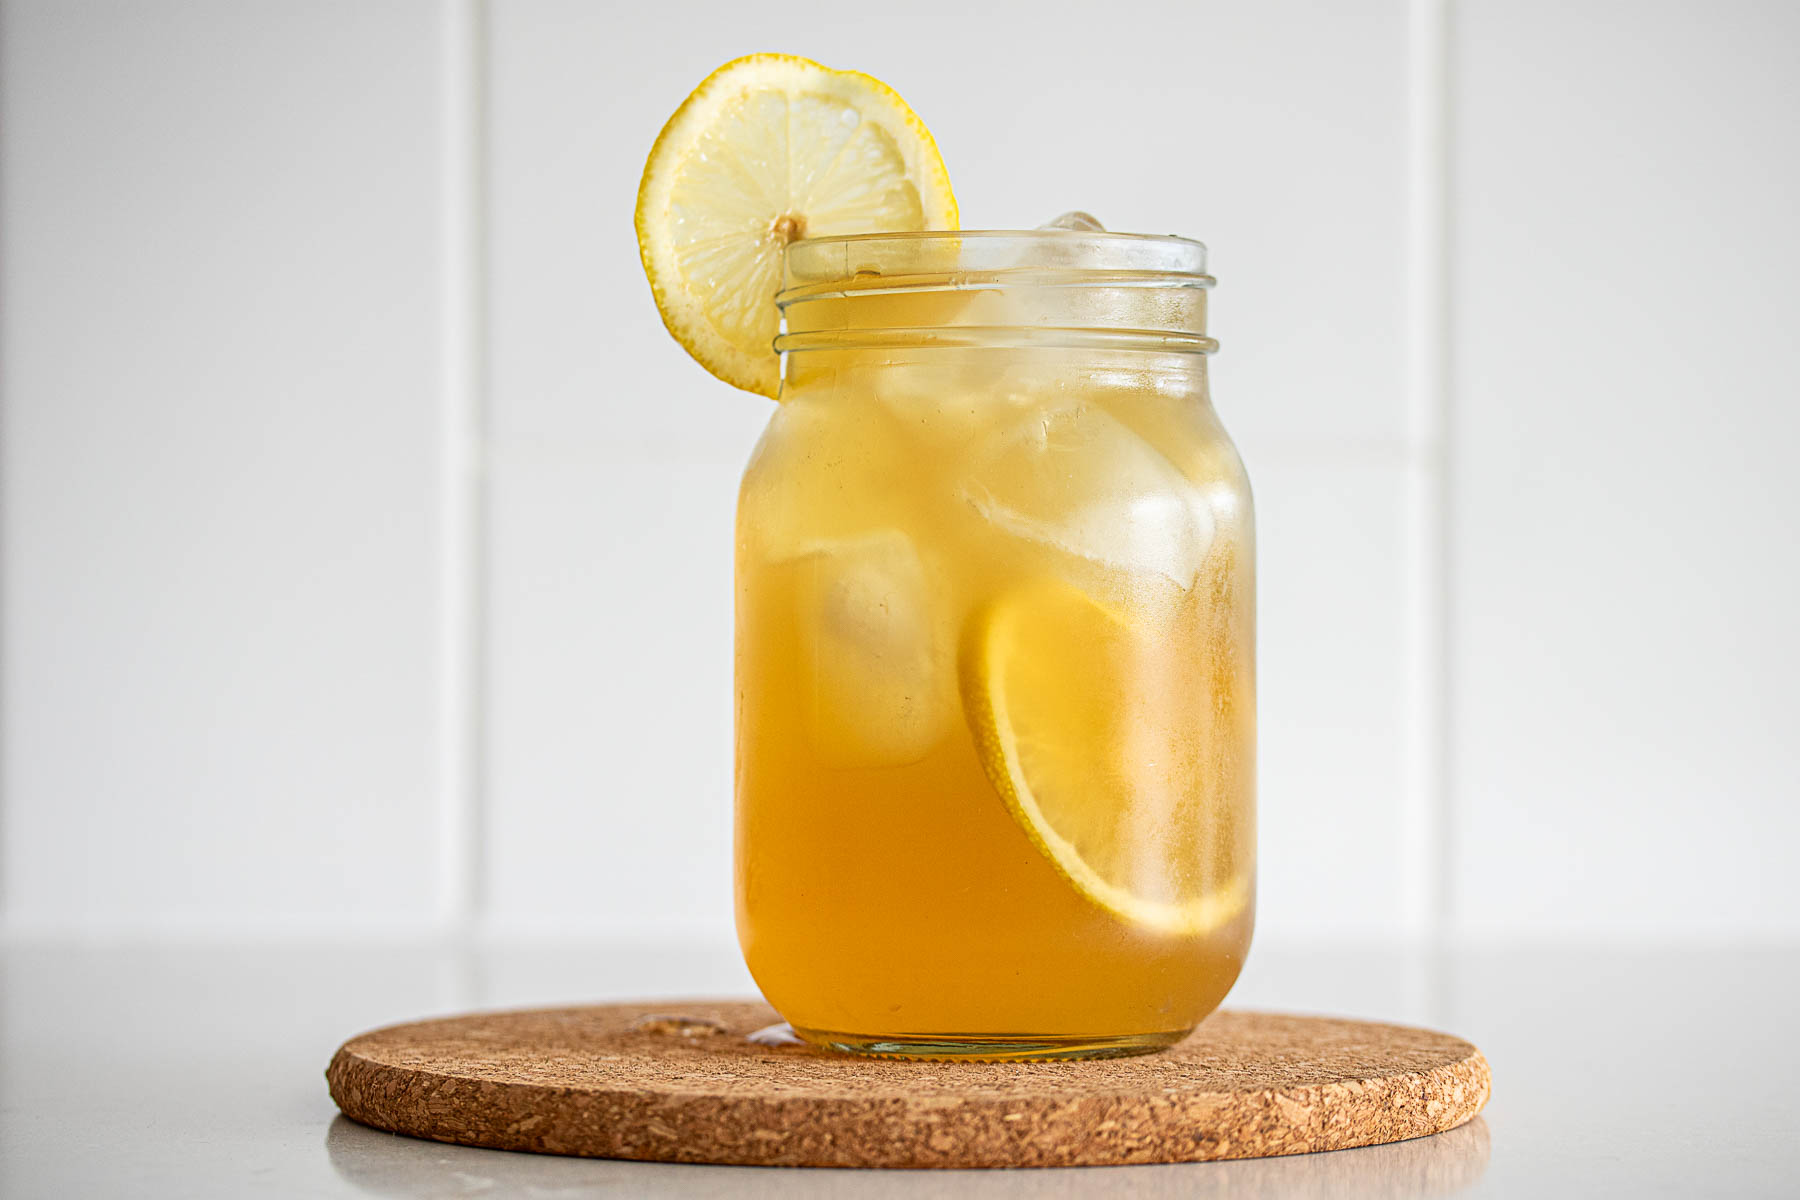 A glass of lemonade, ready to drink.